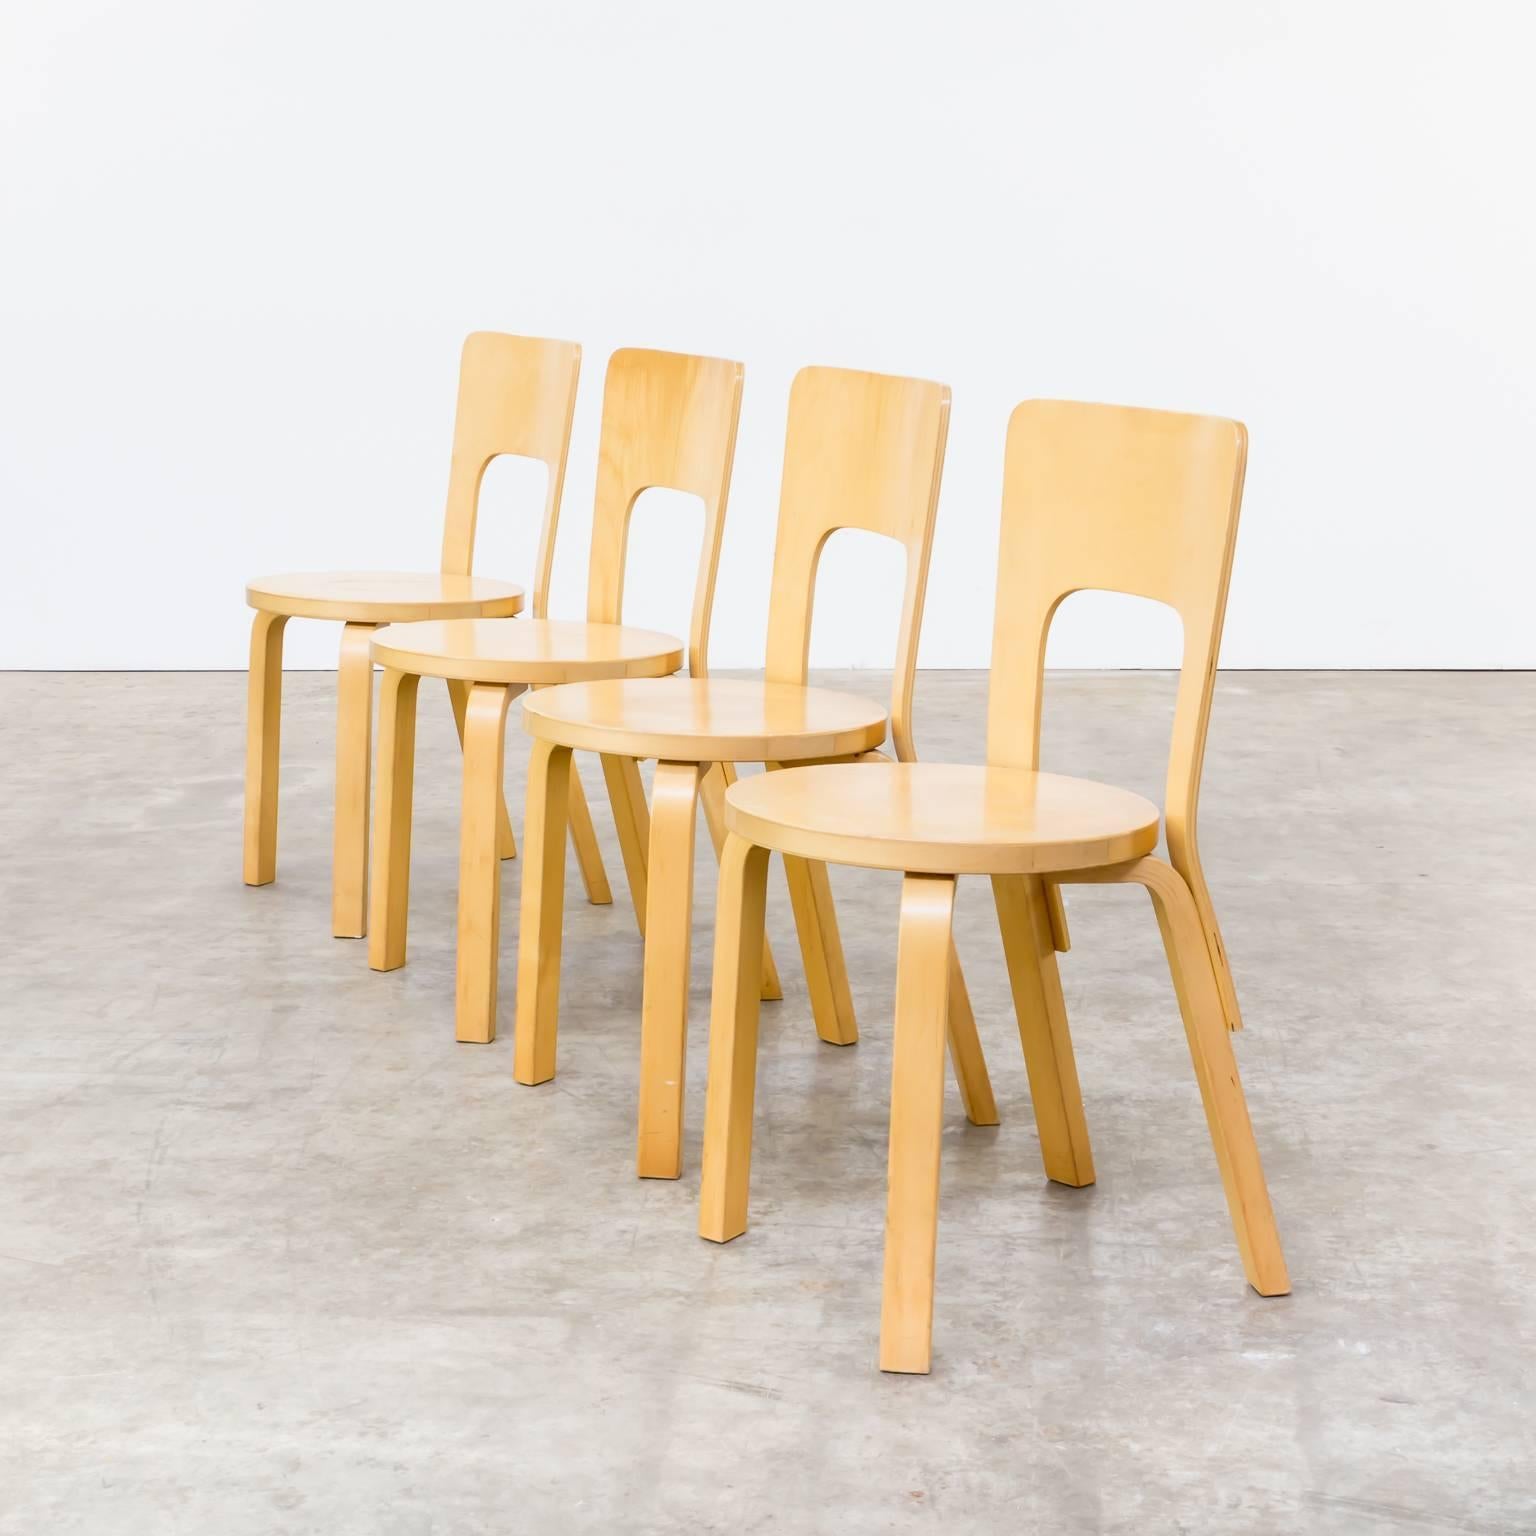 One set of four 1960s Alvar Aalto model 66 dinner chairs for Artek Finland. Beautiful Scandinavian design with plywood bent forms. Good condition, wear consistent with age and use. Dimensions per chair: 37cm (W) x 37cm (D) x 67.5cm (H) seat h 43cm.